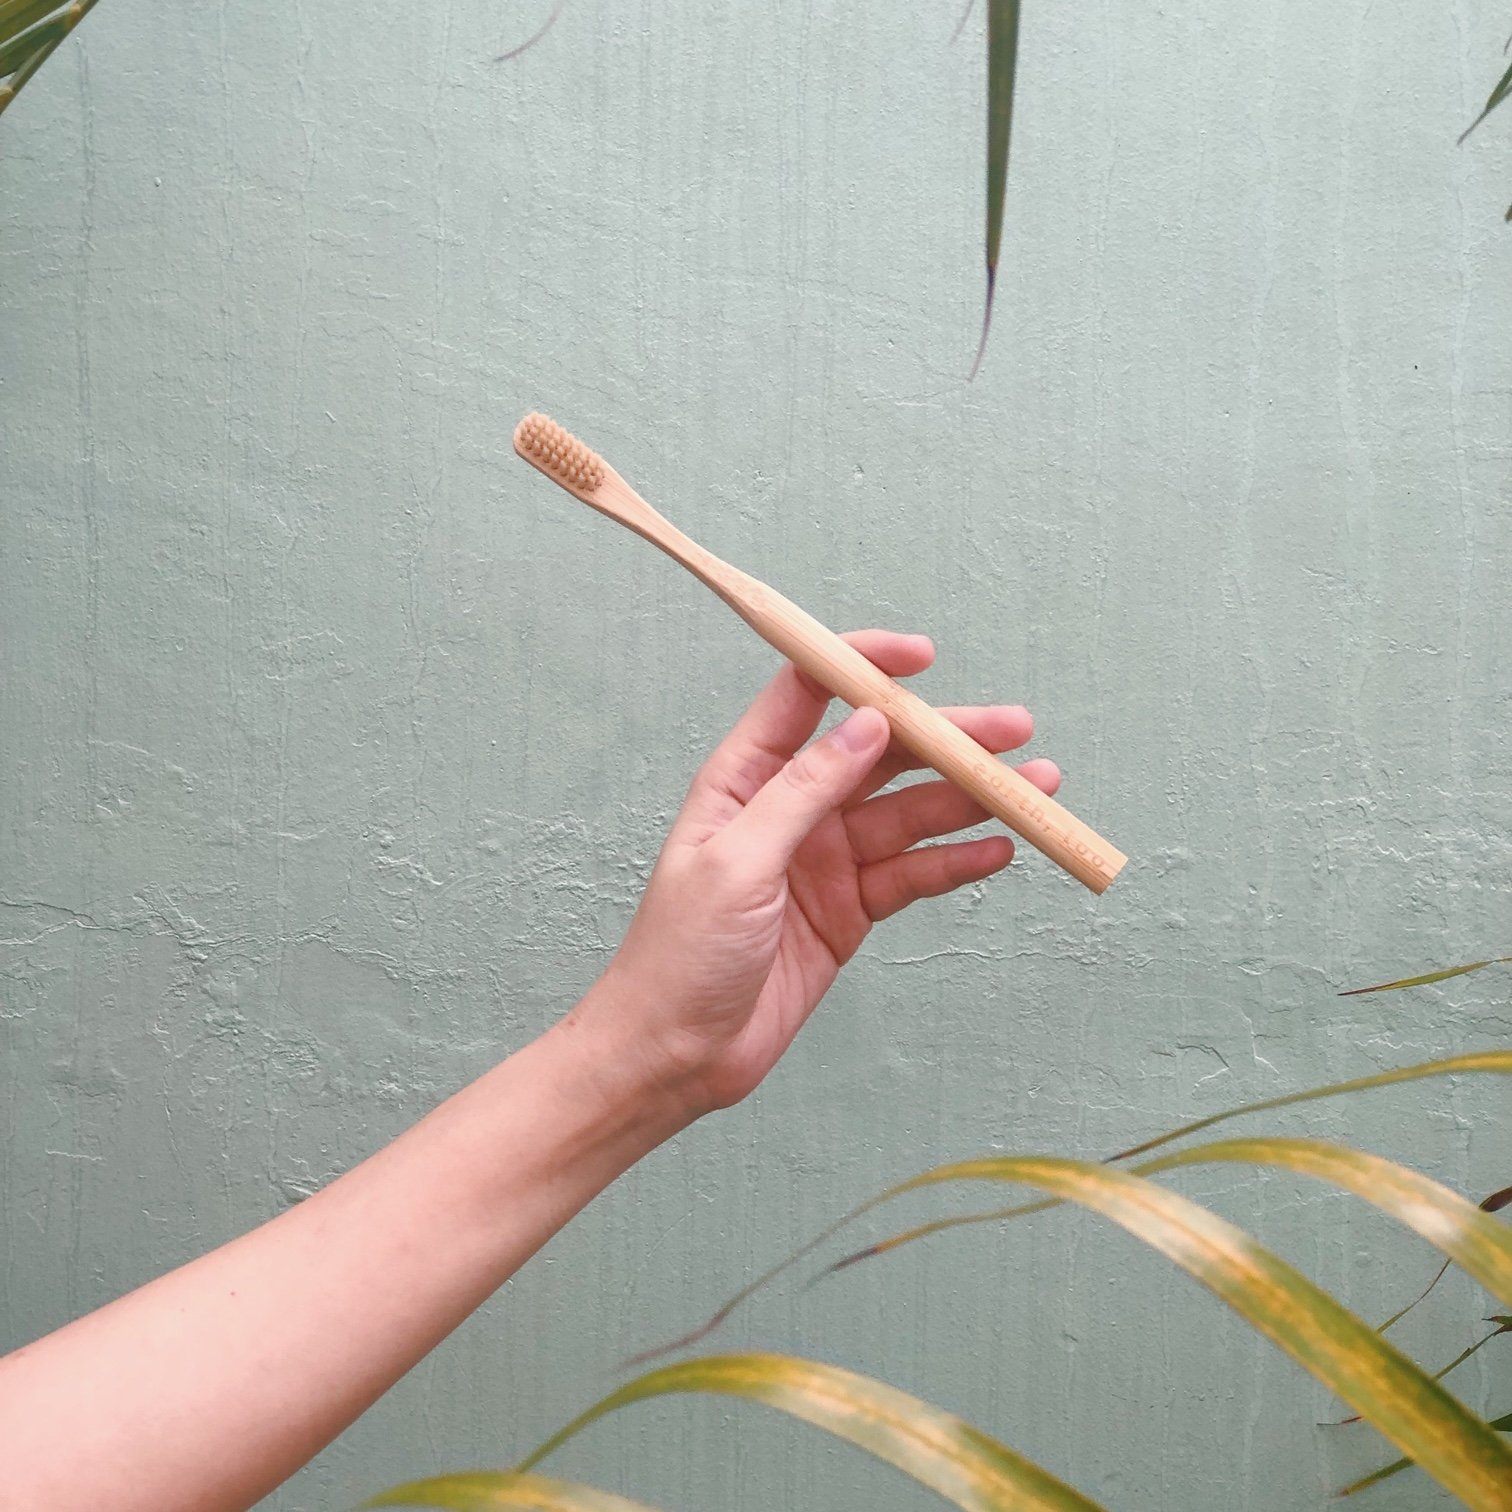 Bamboo Toothbrush - Adult Lifestyle Earth, Too